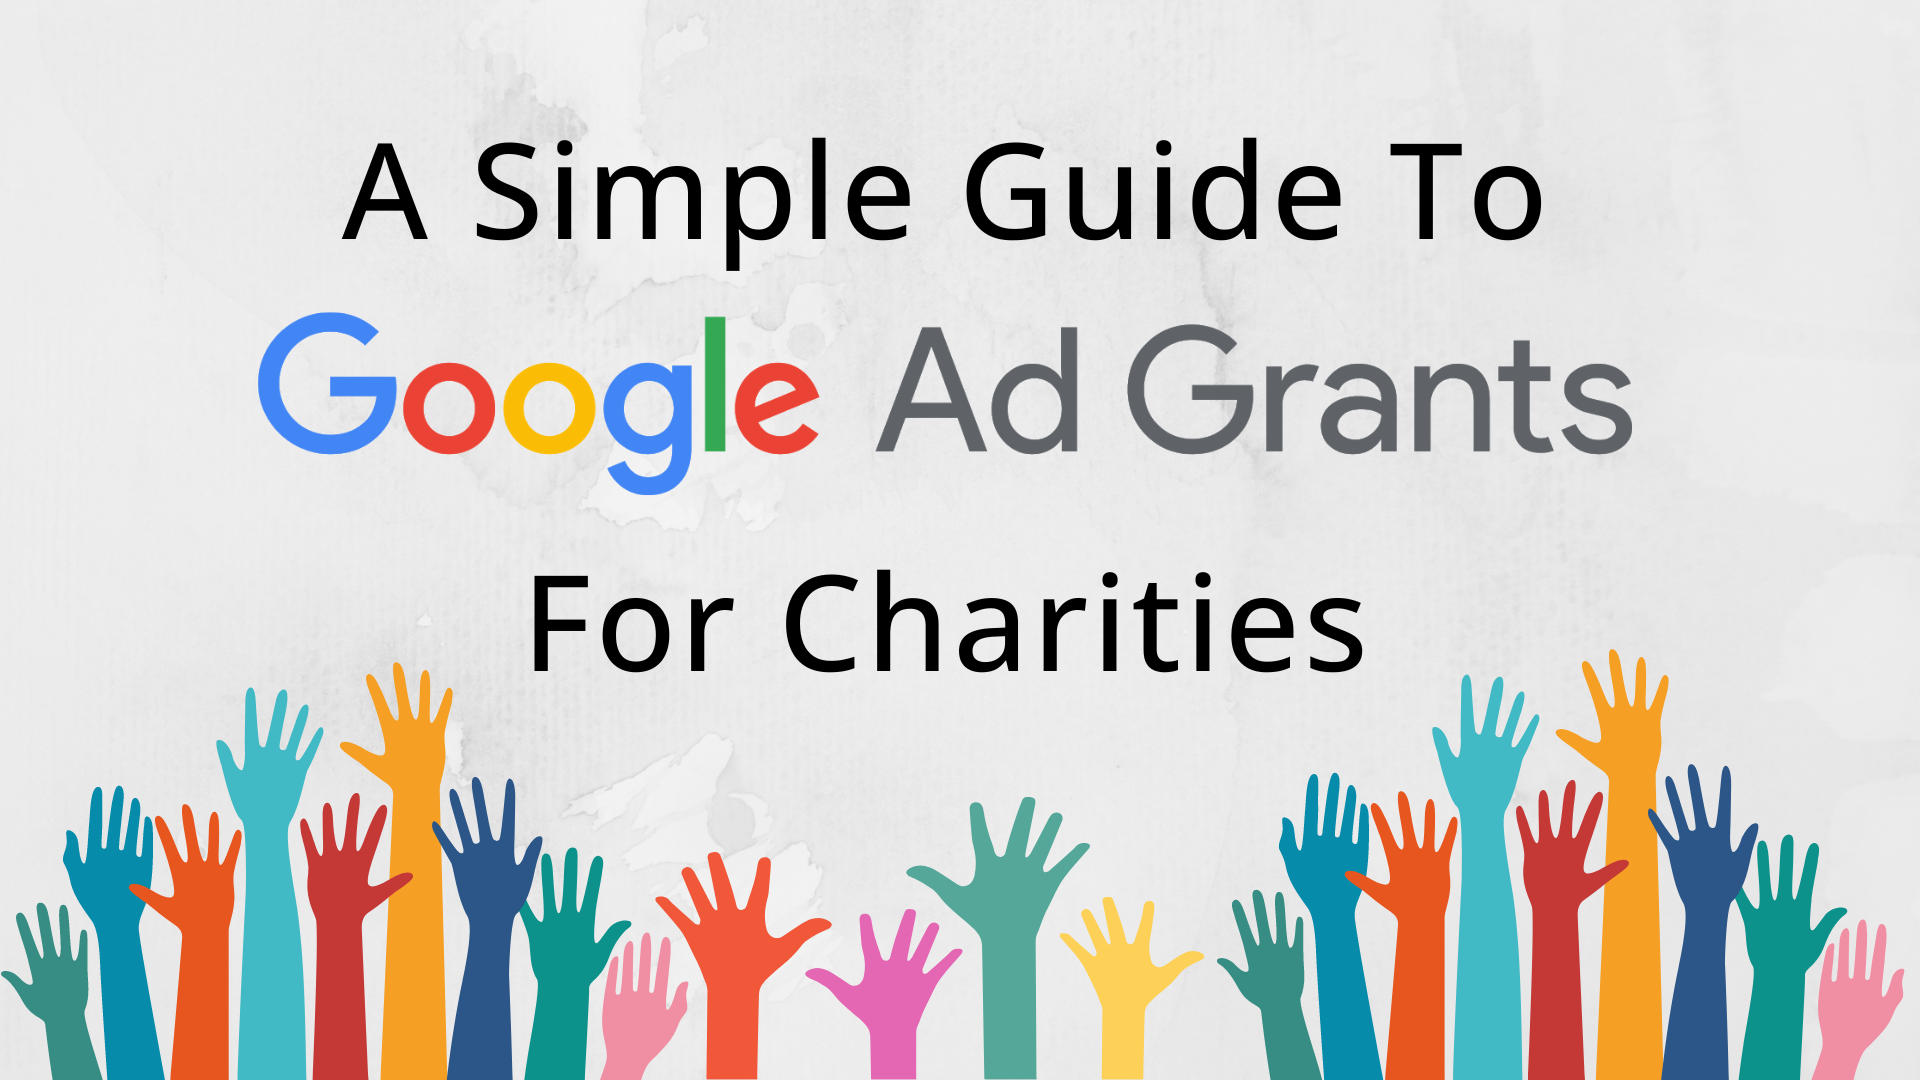 A Simple Guide to Google Ad Grants For Charities